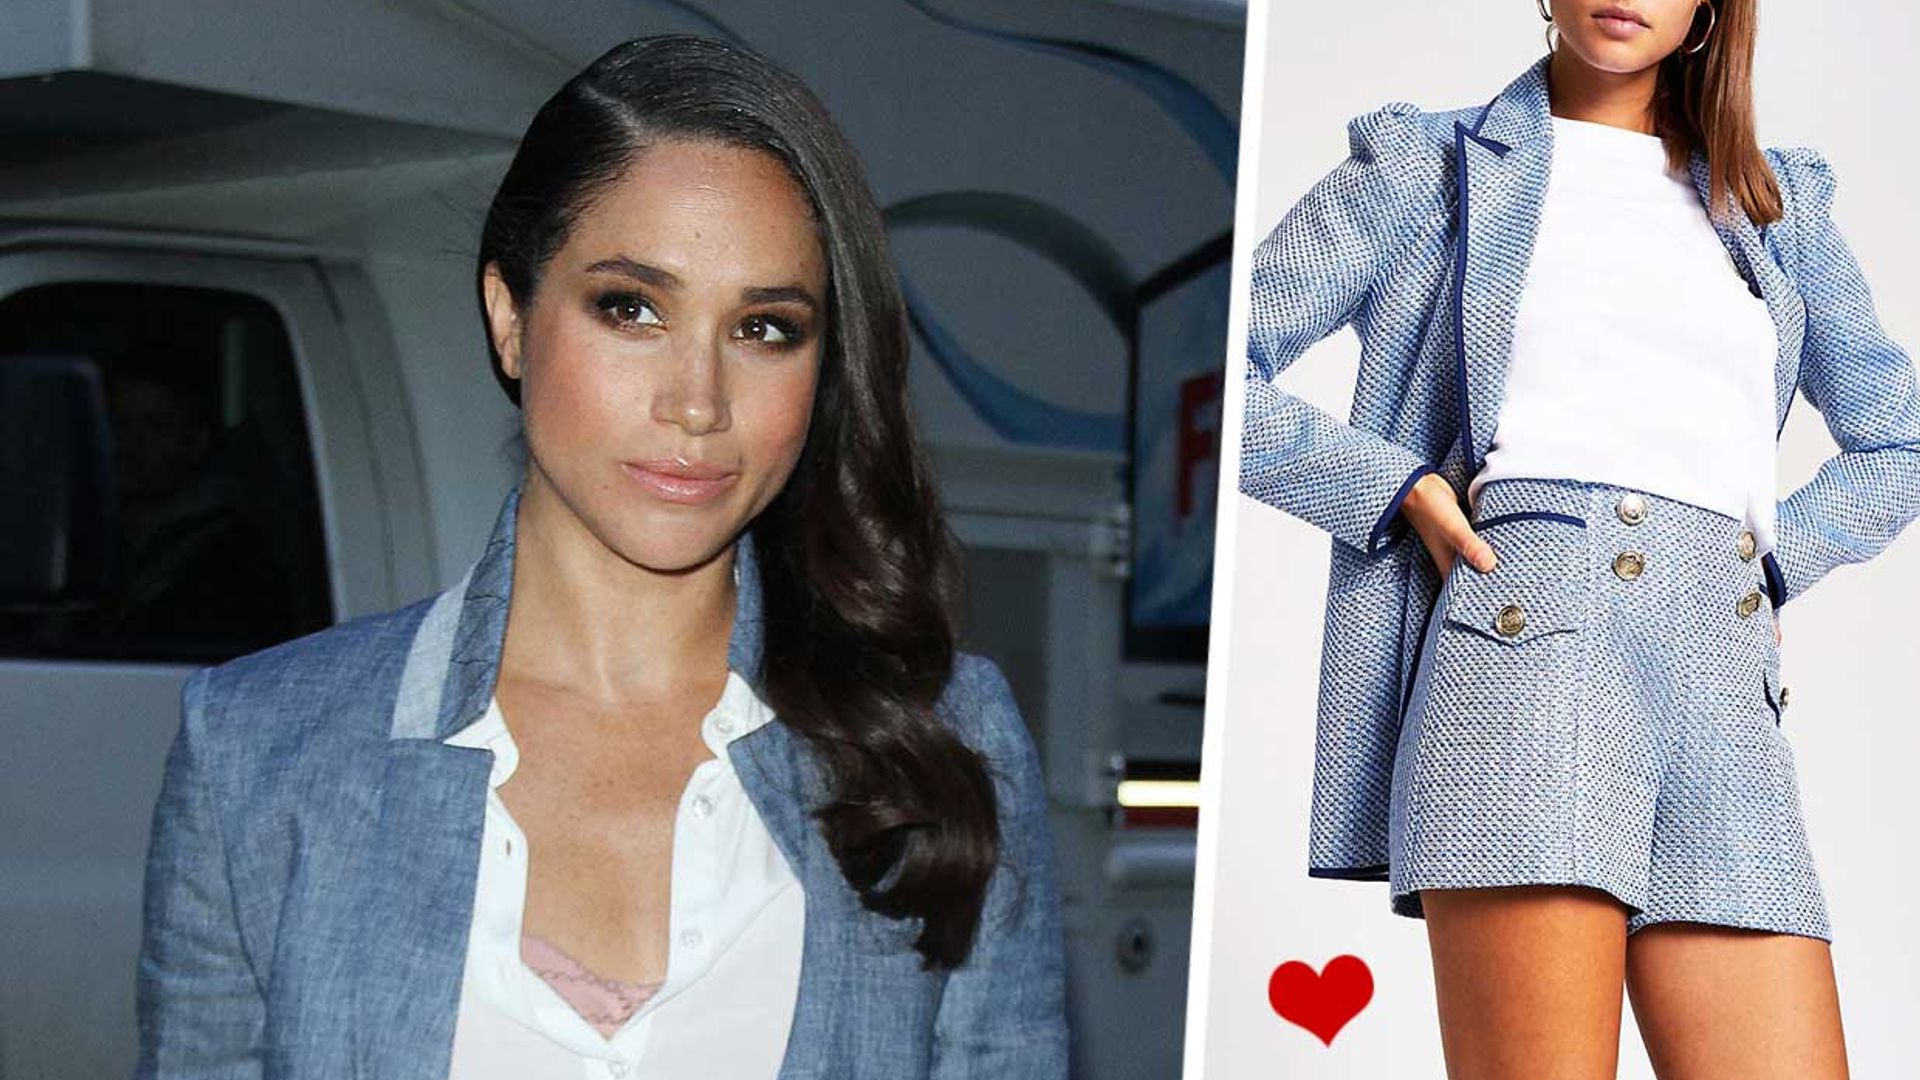 River Island's new blue suit reminds us of Meghan Markle's outfit for the Today show